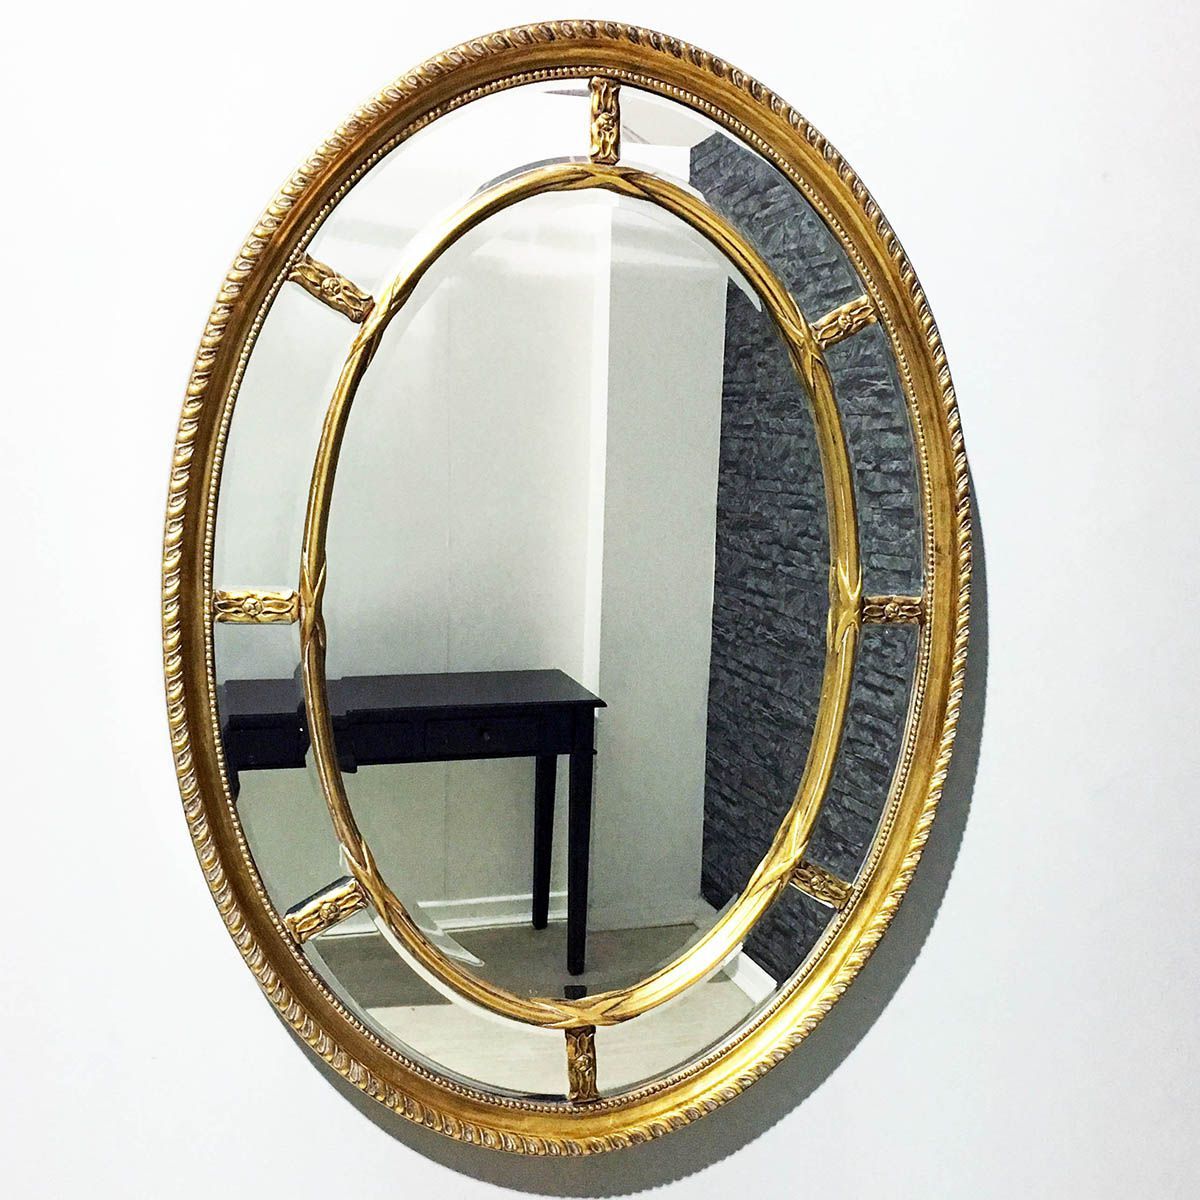 Oval Gold Mirror – 10 Ways To Renew Your Room! | Inovation Intended For Oval Metallic Accent Mirrors (View 10 of 15)